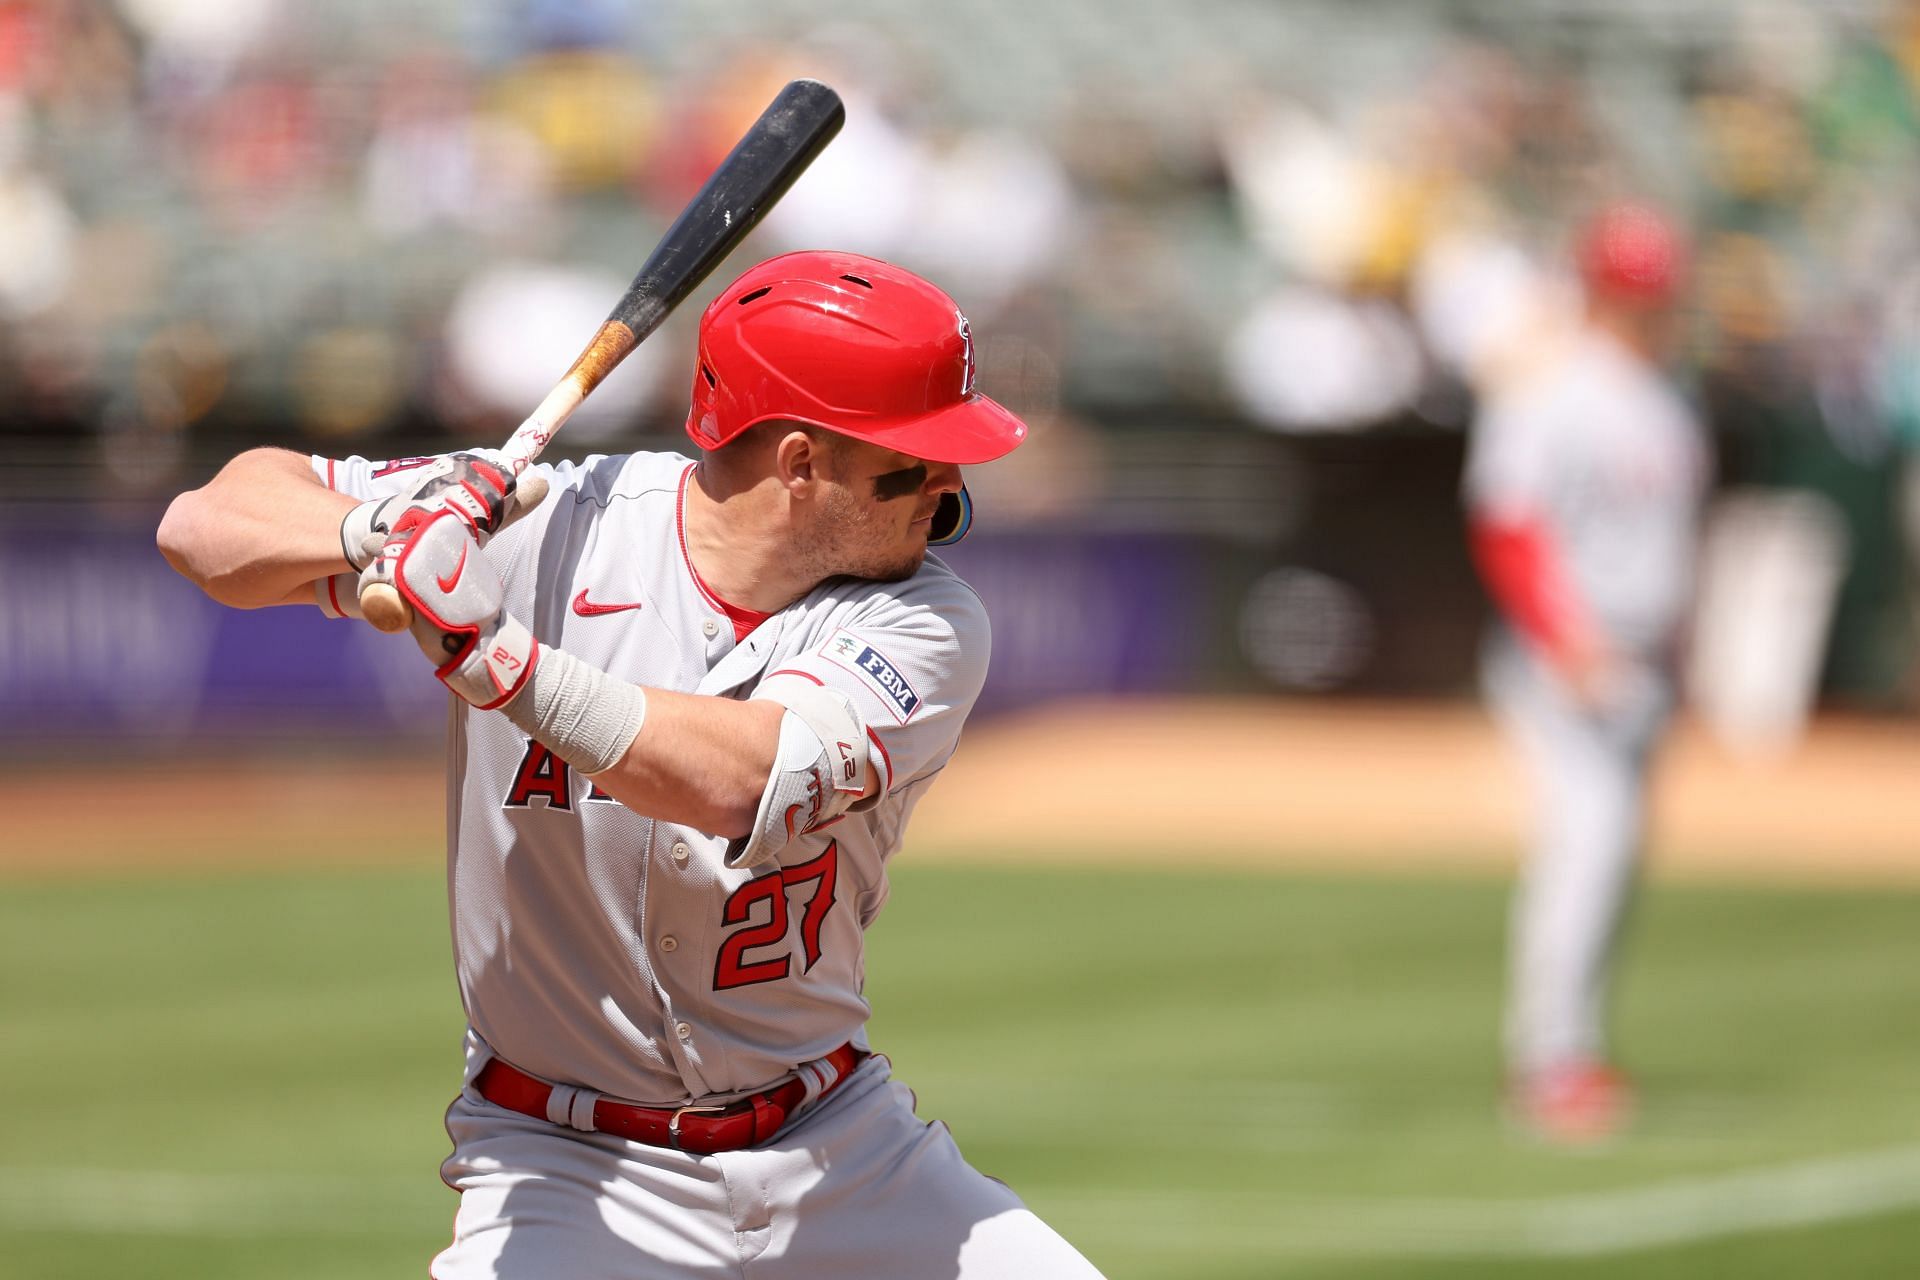 What Pros Wear: What Pros Wear Update: Mike Trout (Bat, Batting